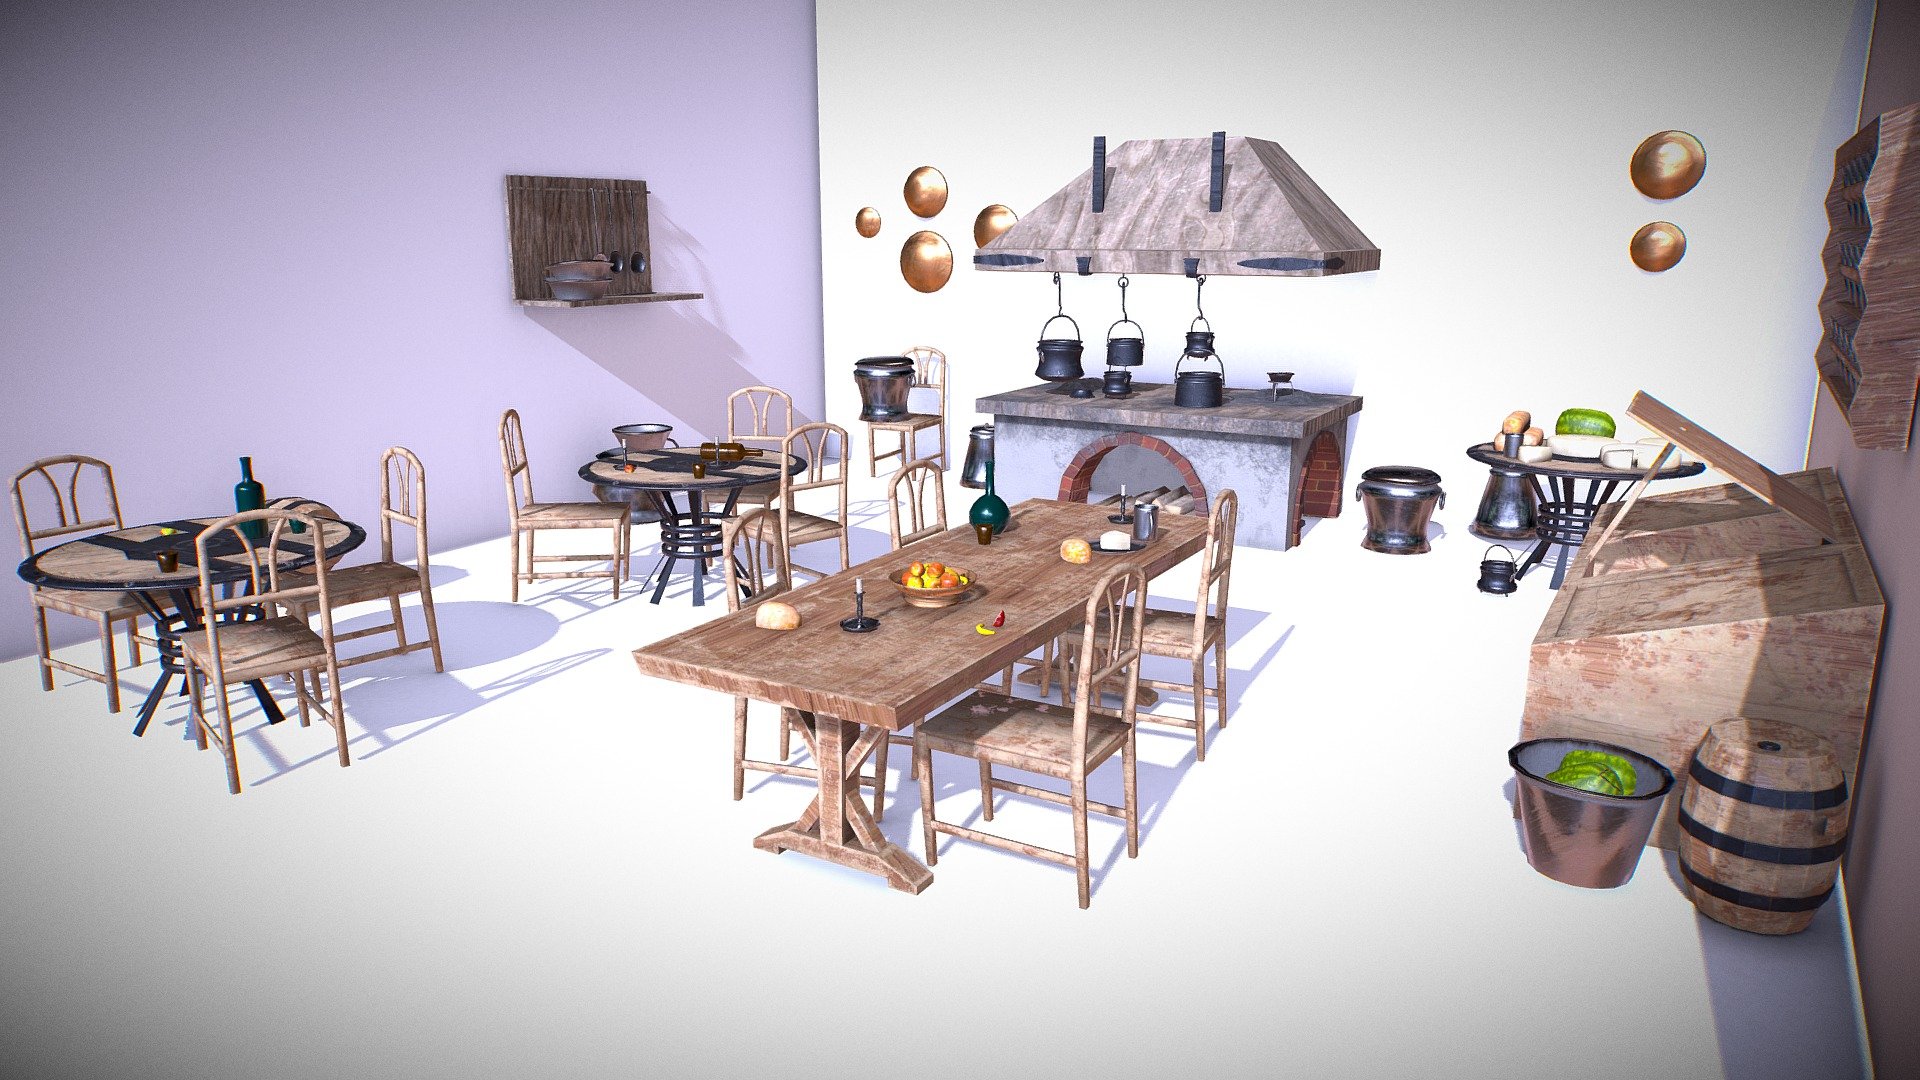 Download this perfect kitchen setting for medieval environments that was handcrafted with love by Insya. 
This is a highly detailed medieval kitchen and props asset pack that contains tens of assets. 
Contains tables ( rectangular and circular), wood fired stove with ventilation hood, wooden rack for stemware, steel pots and pans, barrels, brassware adorned on the wall. 
Also has smaller props like: candles, fruits, eaten fruit, watermelon, cheese, bottles, water cups, and many more.
 This download is bundled with textures suitable for:
Blender. Can also be imported to: 
Unreal Engine, Unity 5, Amazon Lumberyard, Arnold5, Corona, Cry Engine, Red Shift, VRay, Keyshot







 - Medieval Kitchen Low Poly AR VR Asset Pack - Buy Royalty Free 3D model by insya 3d model